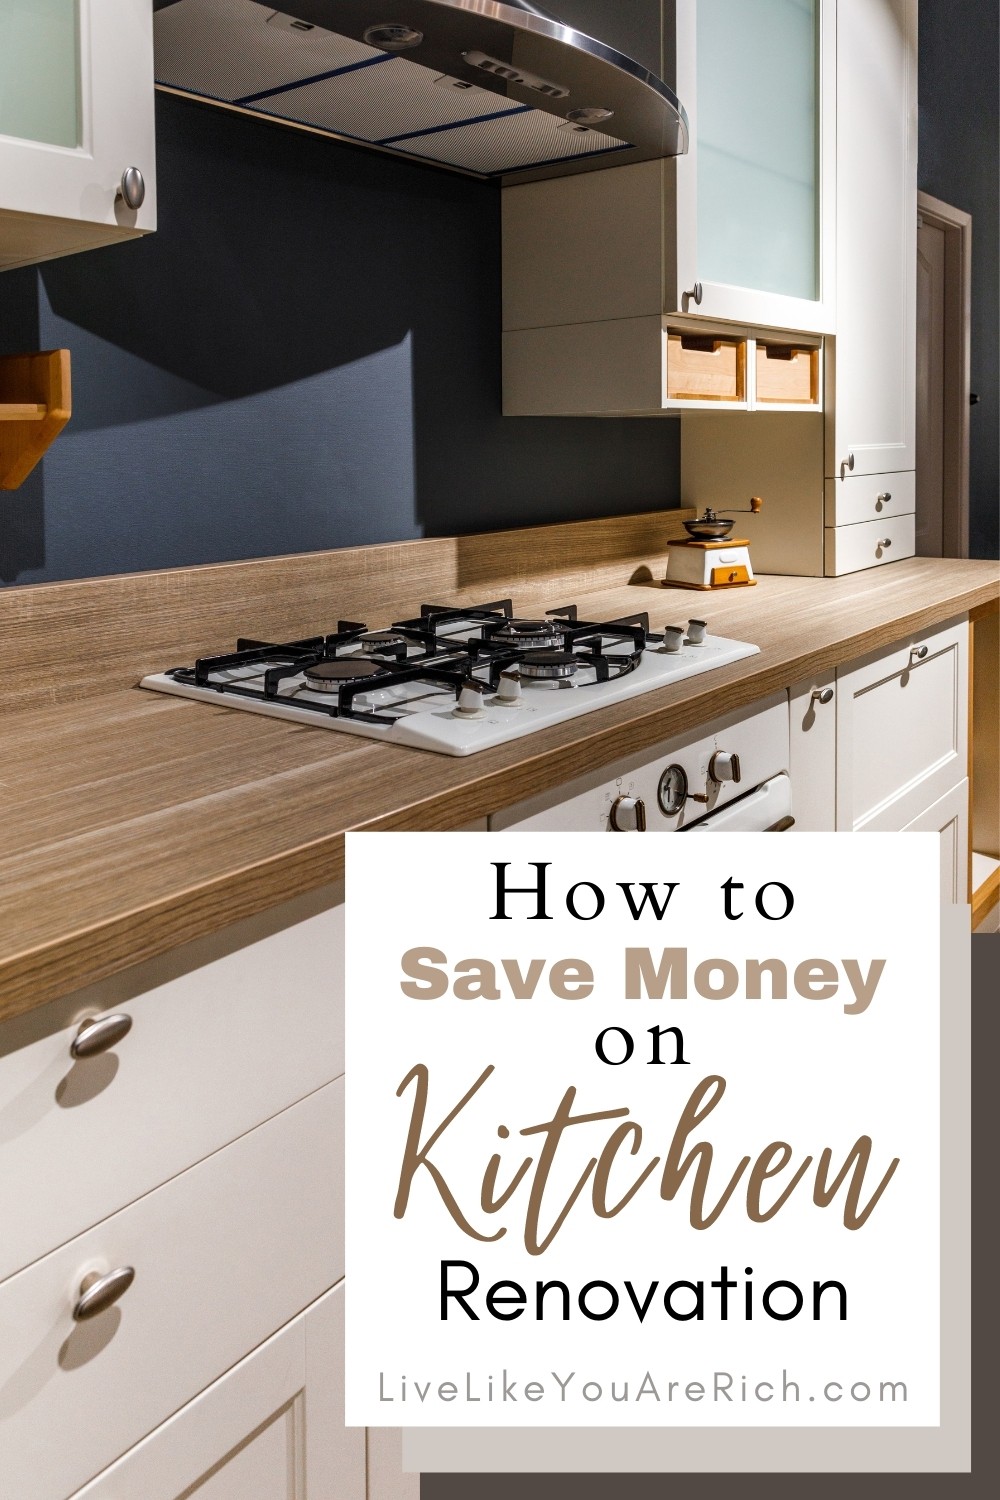 Planning a kitchen remodel/renovation on a budget? Read these money-saving tips and tricks to save tens of thousands on on a kitchen remodel. #kitchen #kitchenrenovation